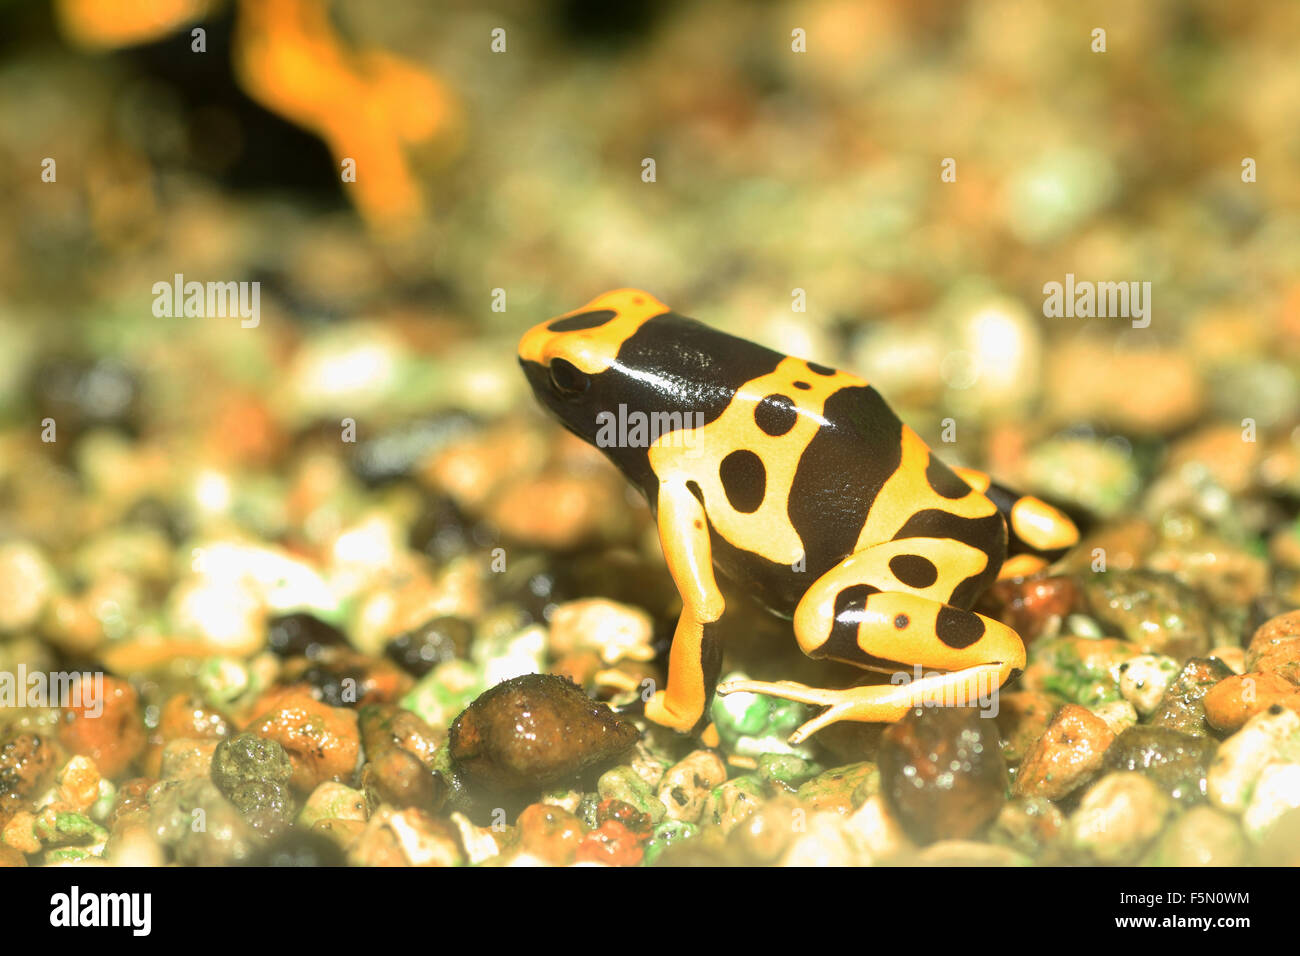 Yellow-headed poison frog or Yellow-banded poison dart frog (Dendrobates leucomelas) in South America Stock Photo